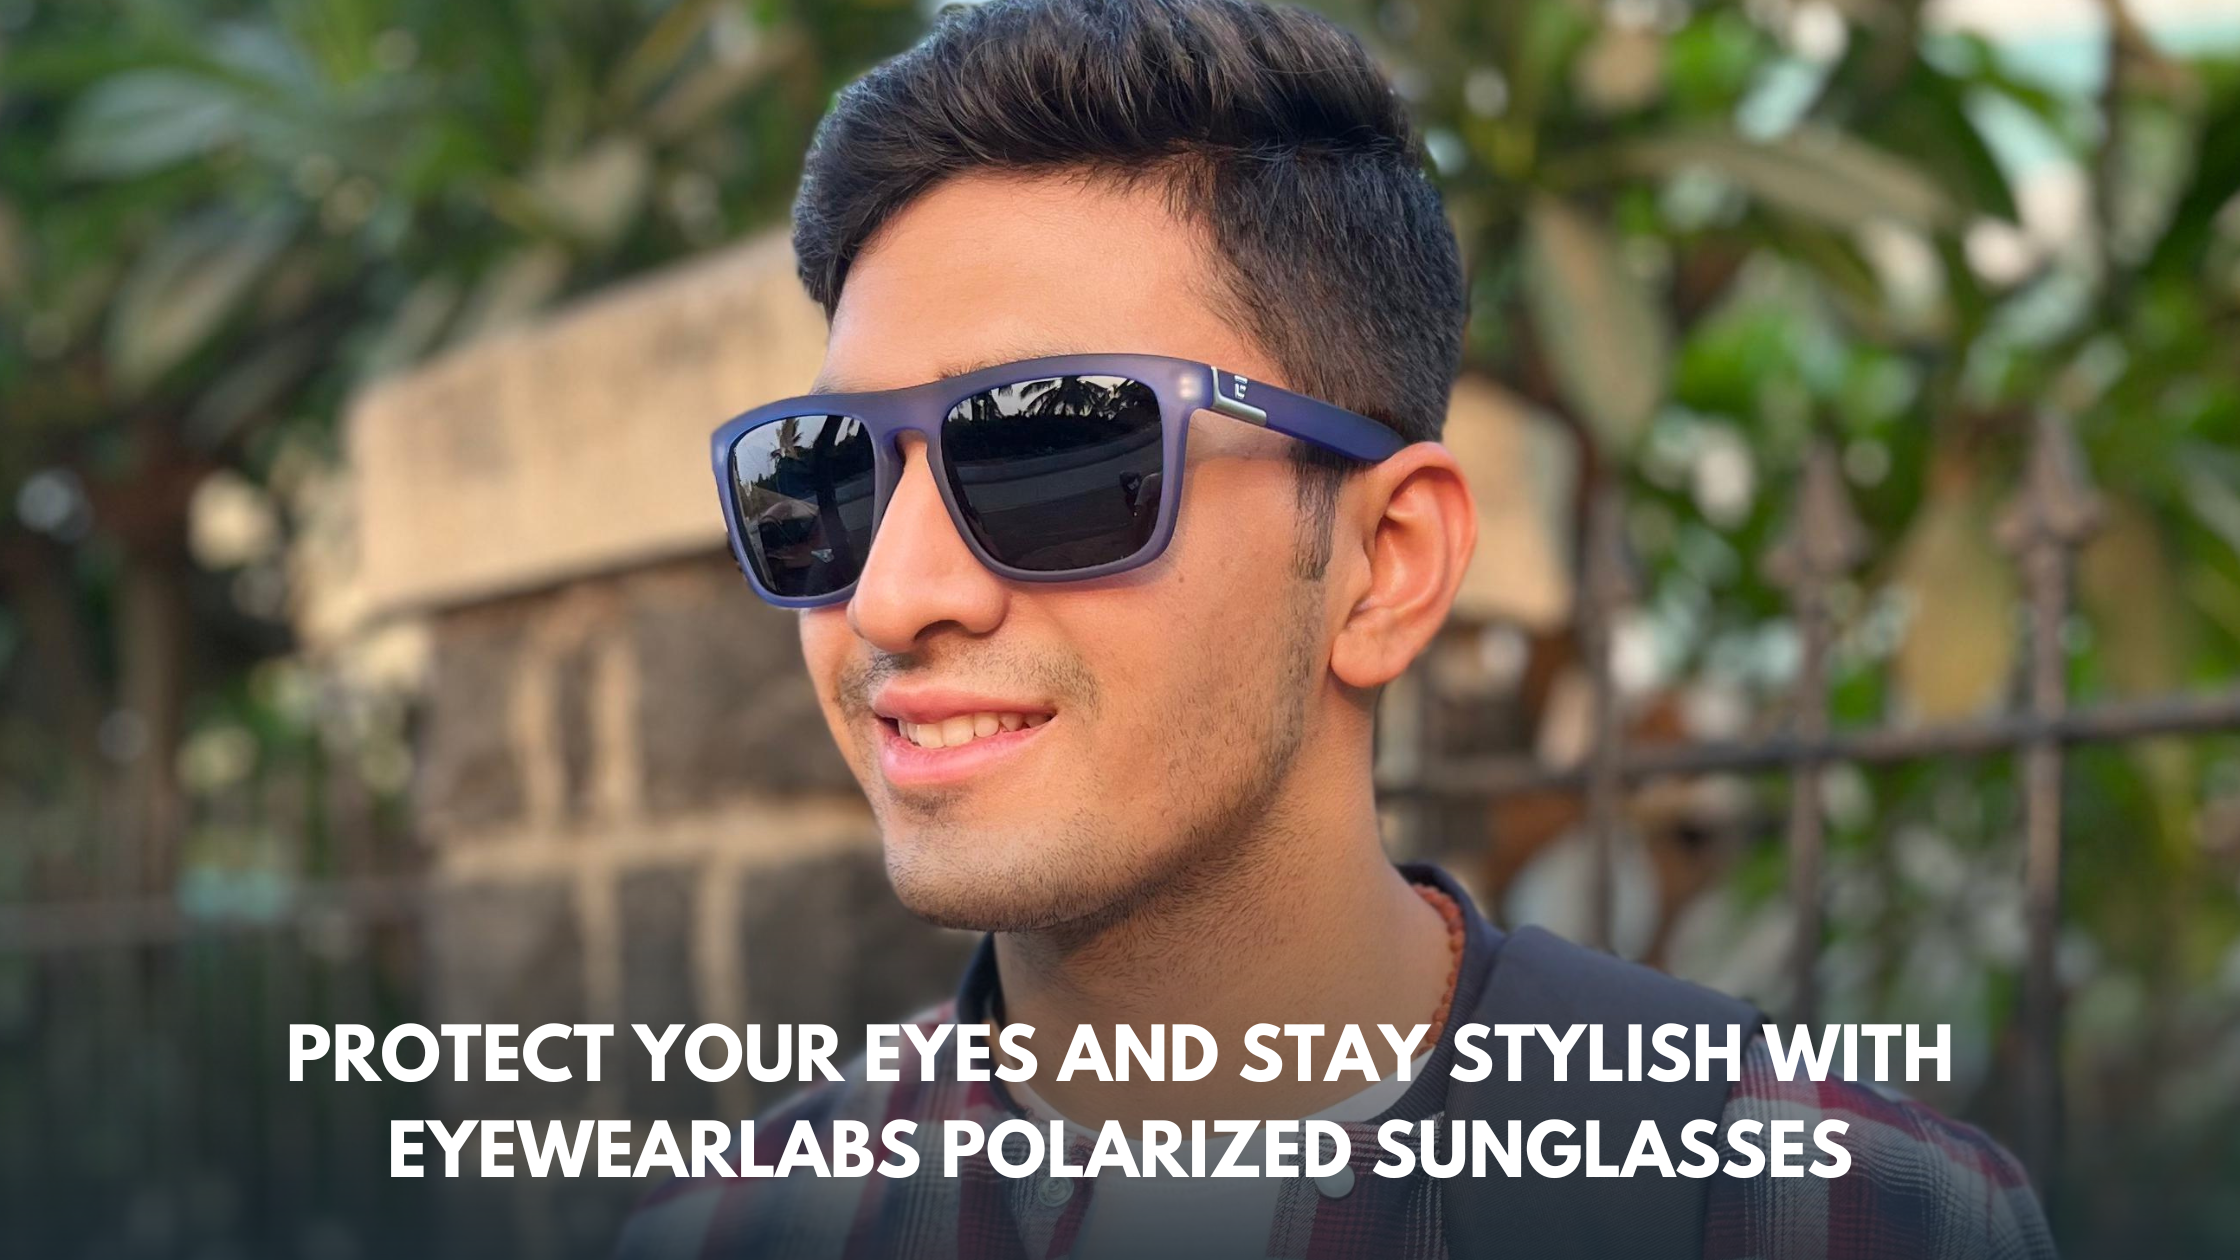 Protect Your Eyes and Stay Stylish with Eyewearlabs Polarized Sunglasses